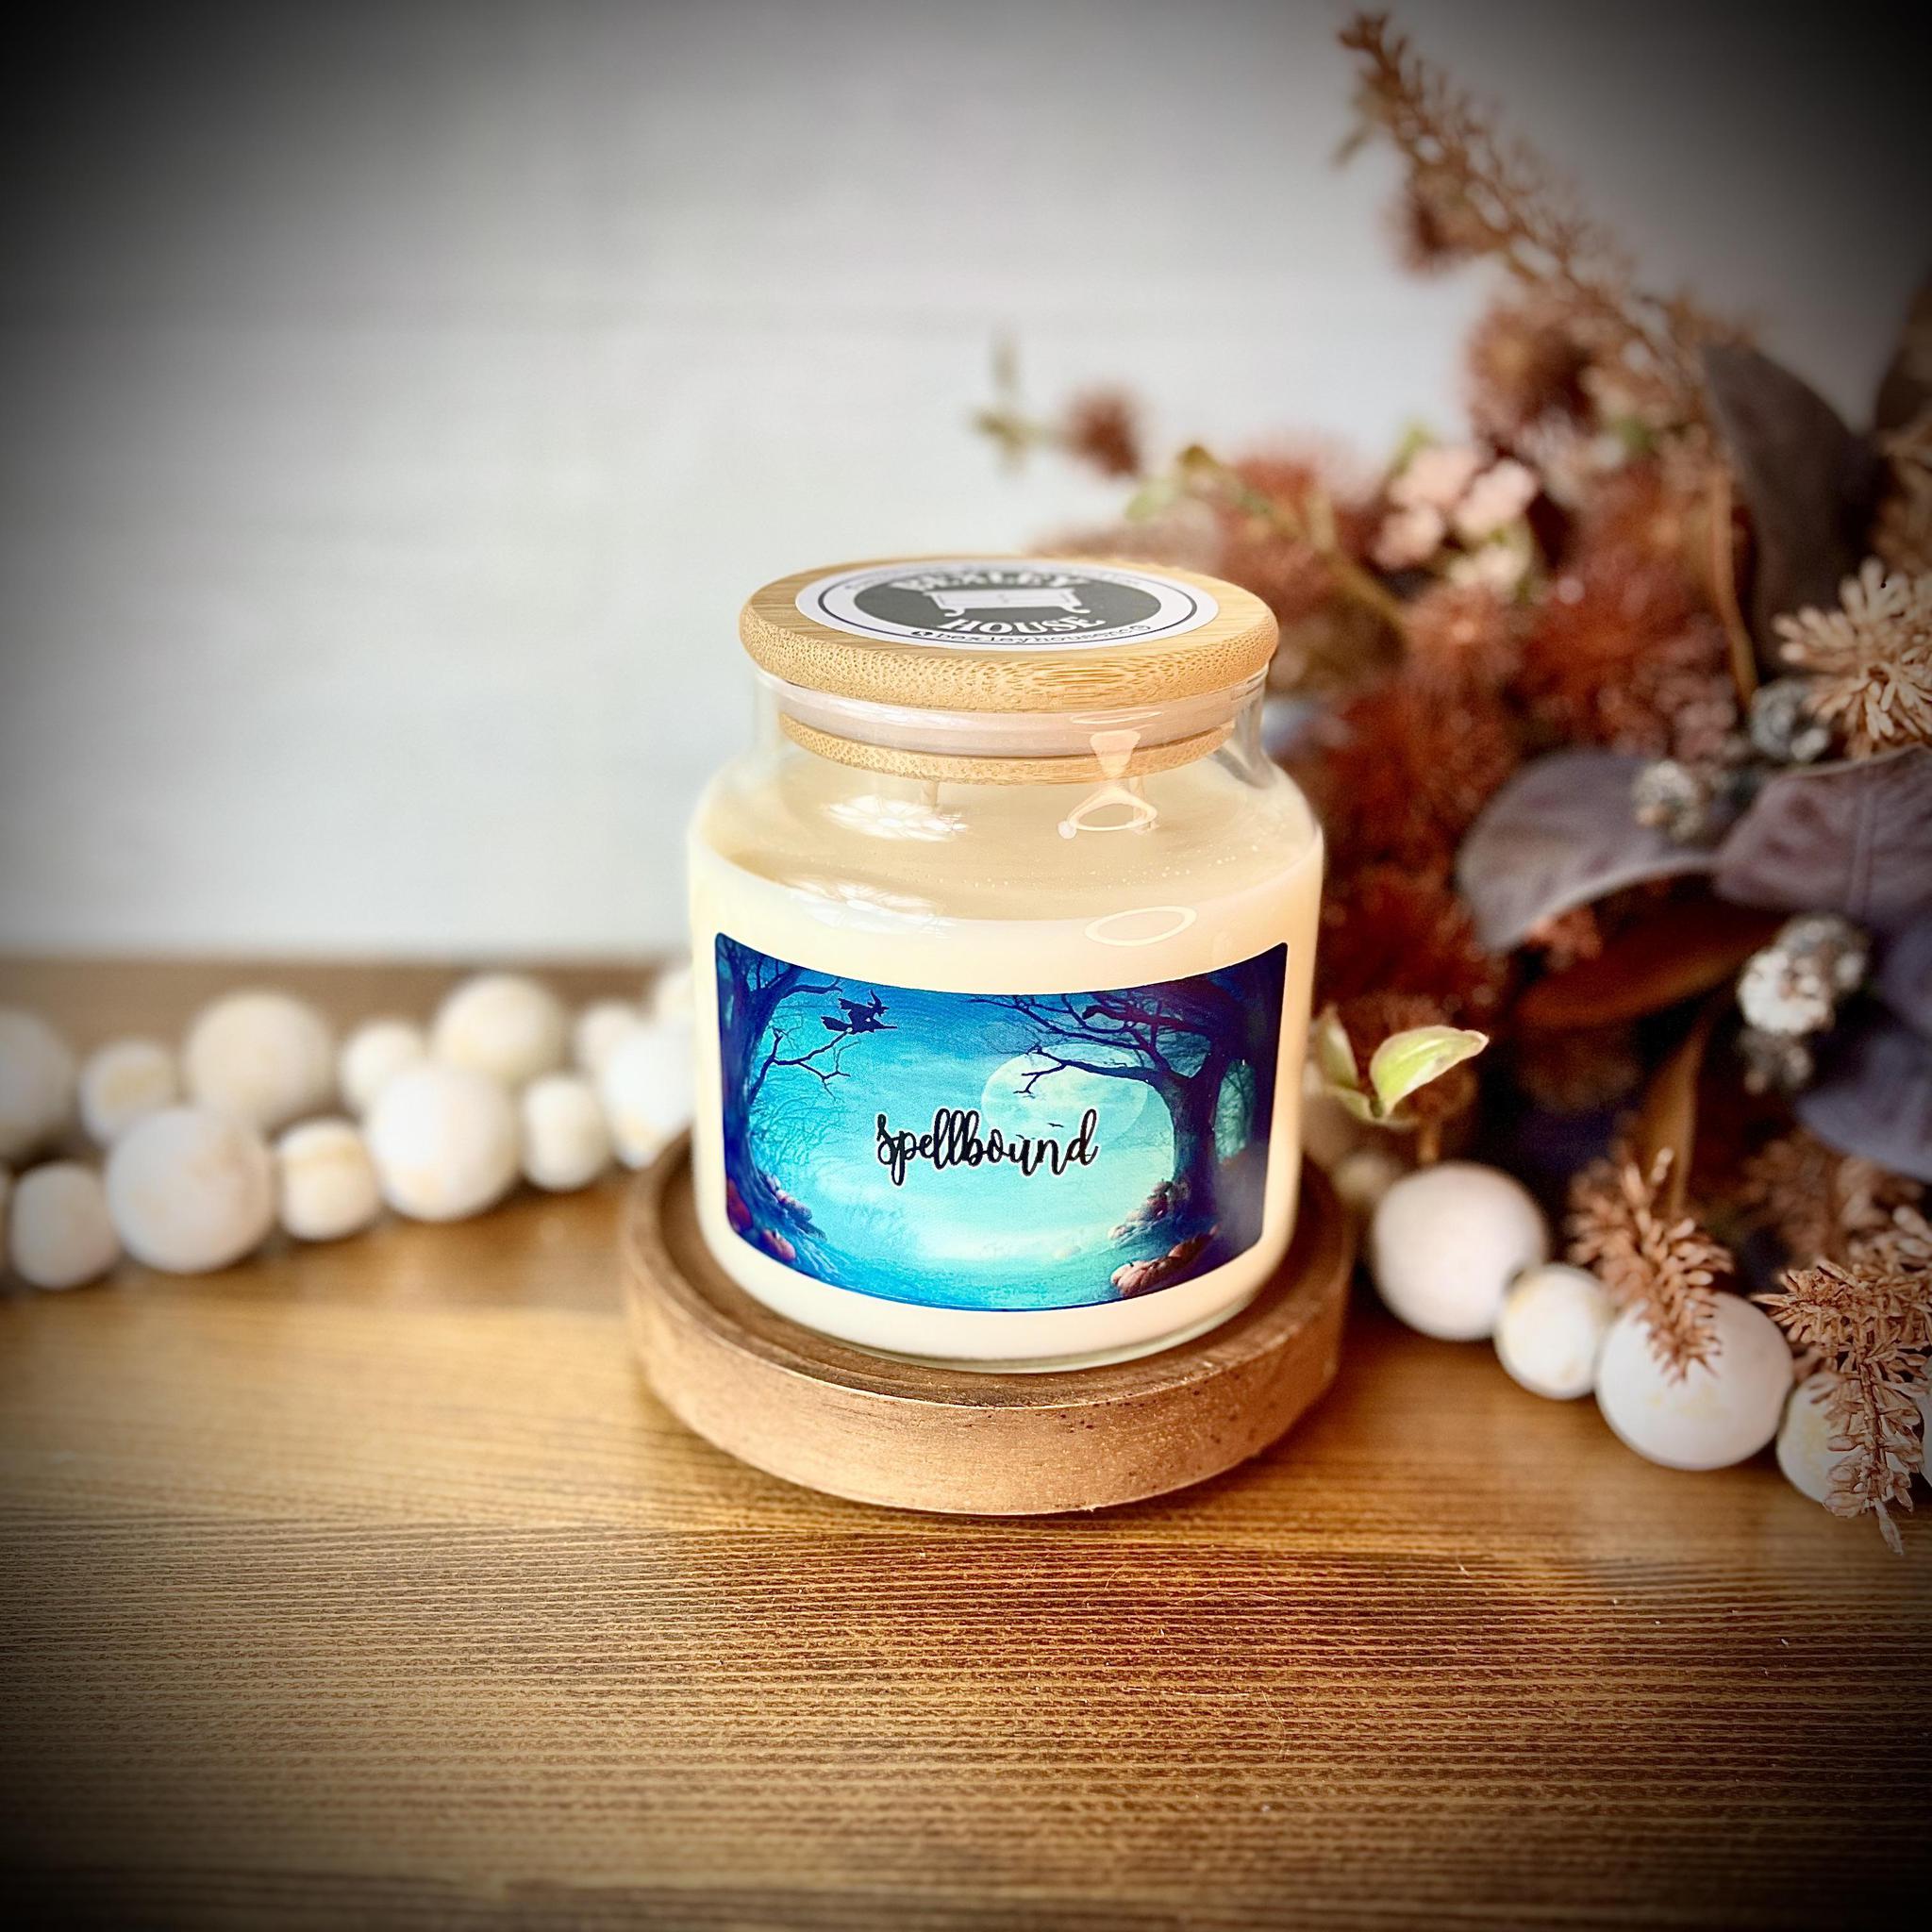 Bexley House 16oz Apothecary Candle - Spellbound